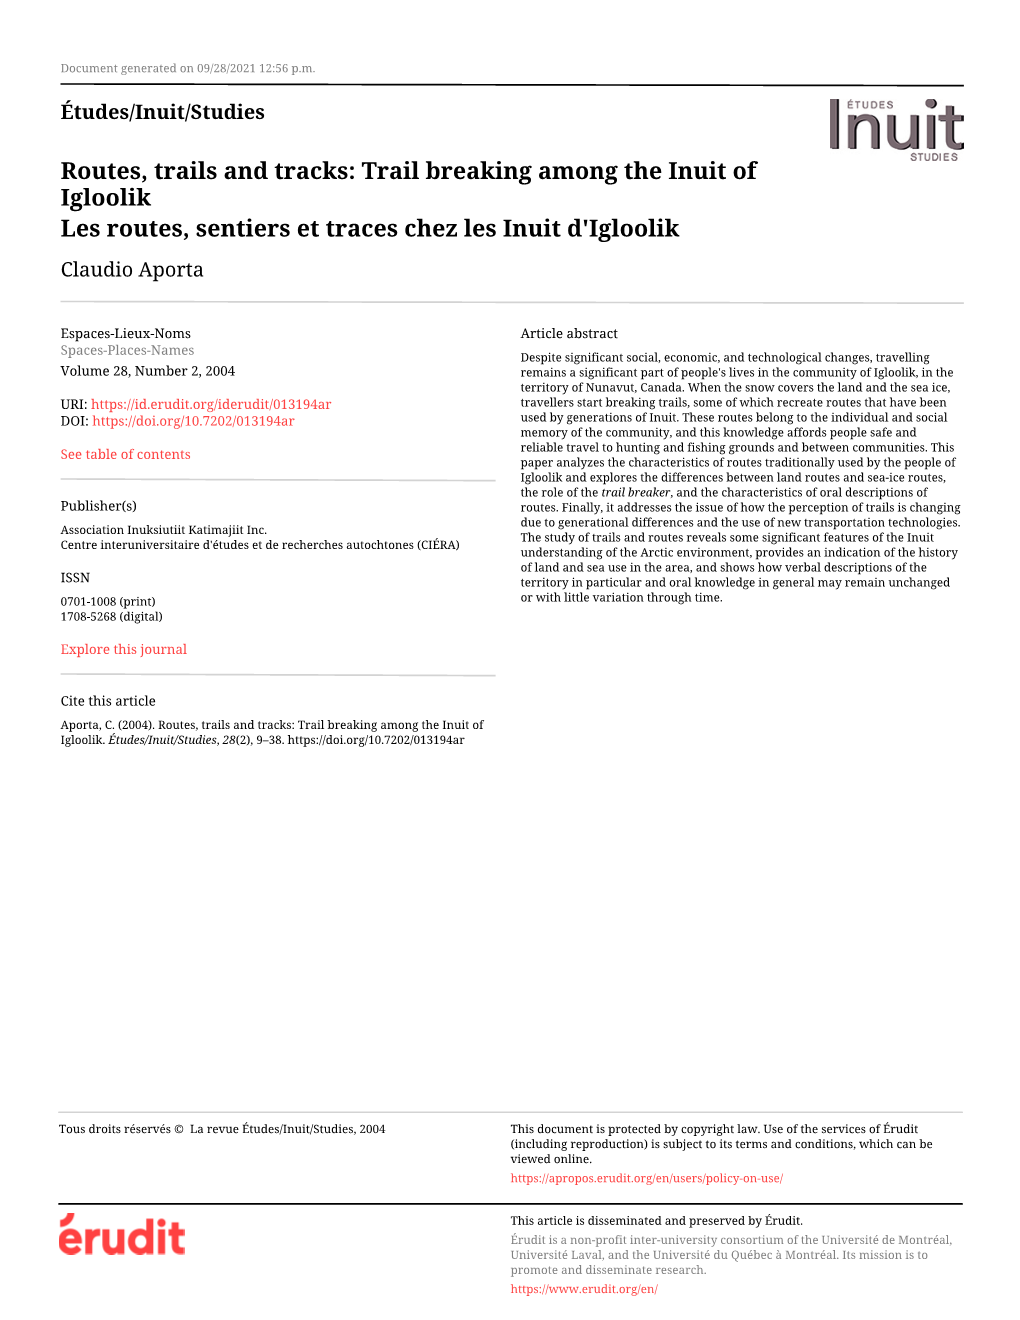 Routes, Trails and Tracks: Trail Breaking Among the Inuit of Igloolik Les Routes, Sentiers Et Traces Chez Les Inuit D'igloolik Claudio Aporta